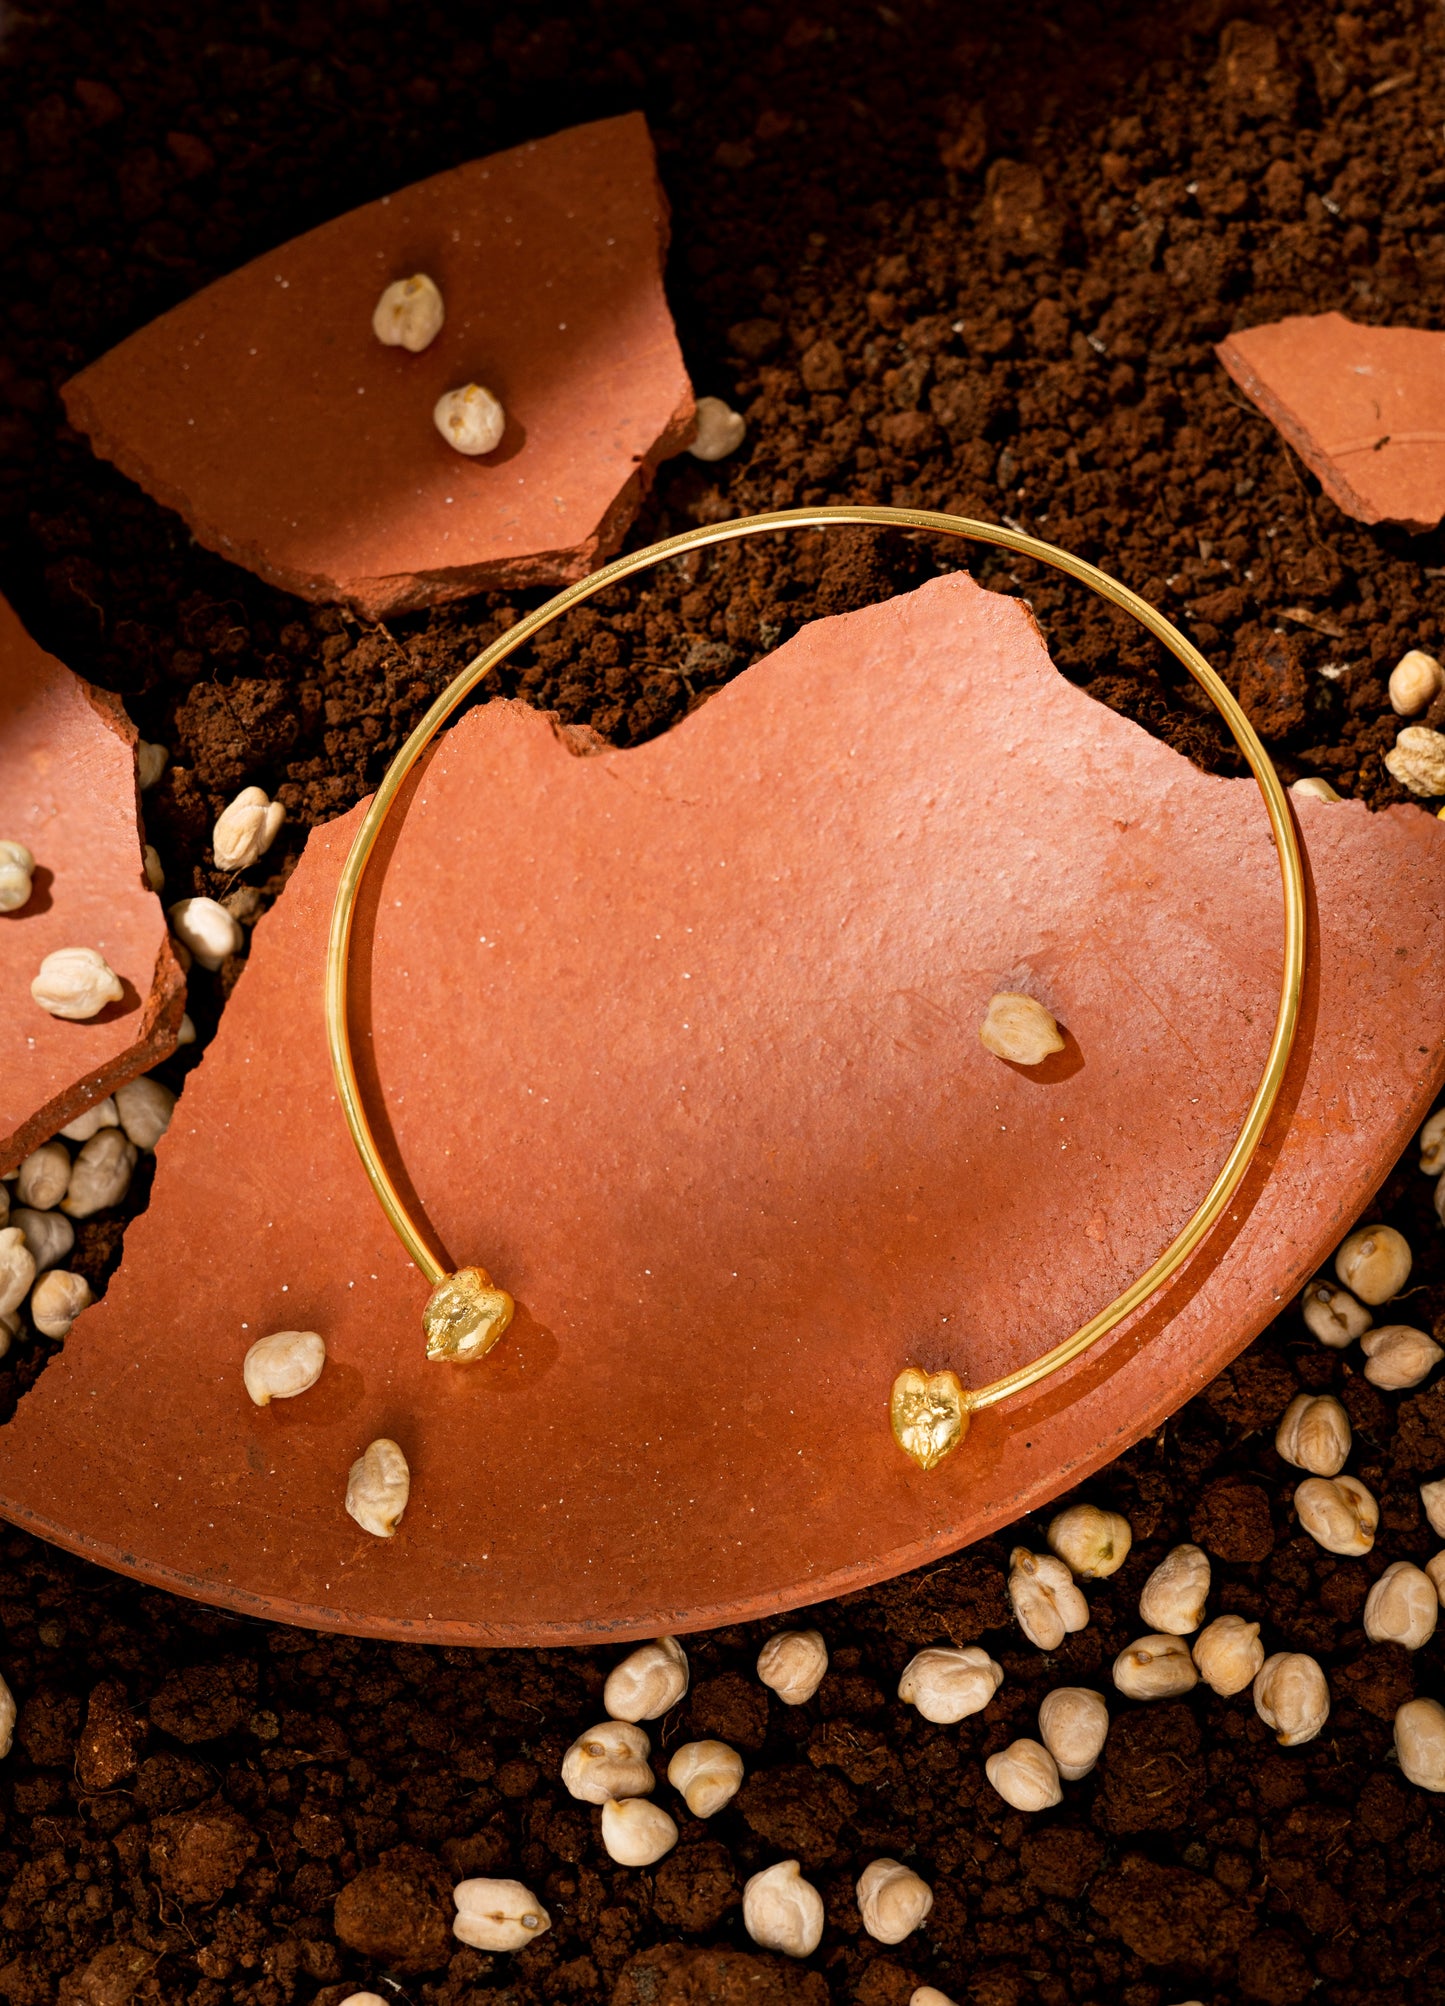 Gold platted sustainable chickpea/food inspired jewellery 